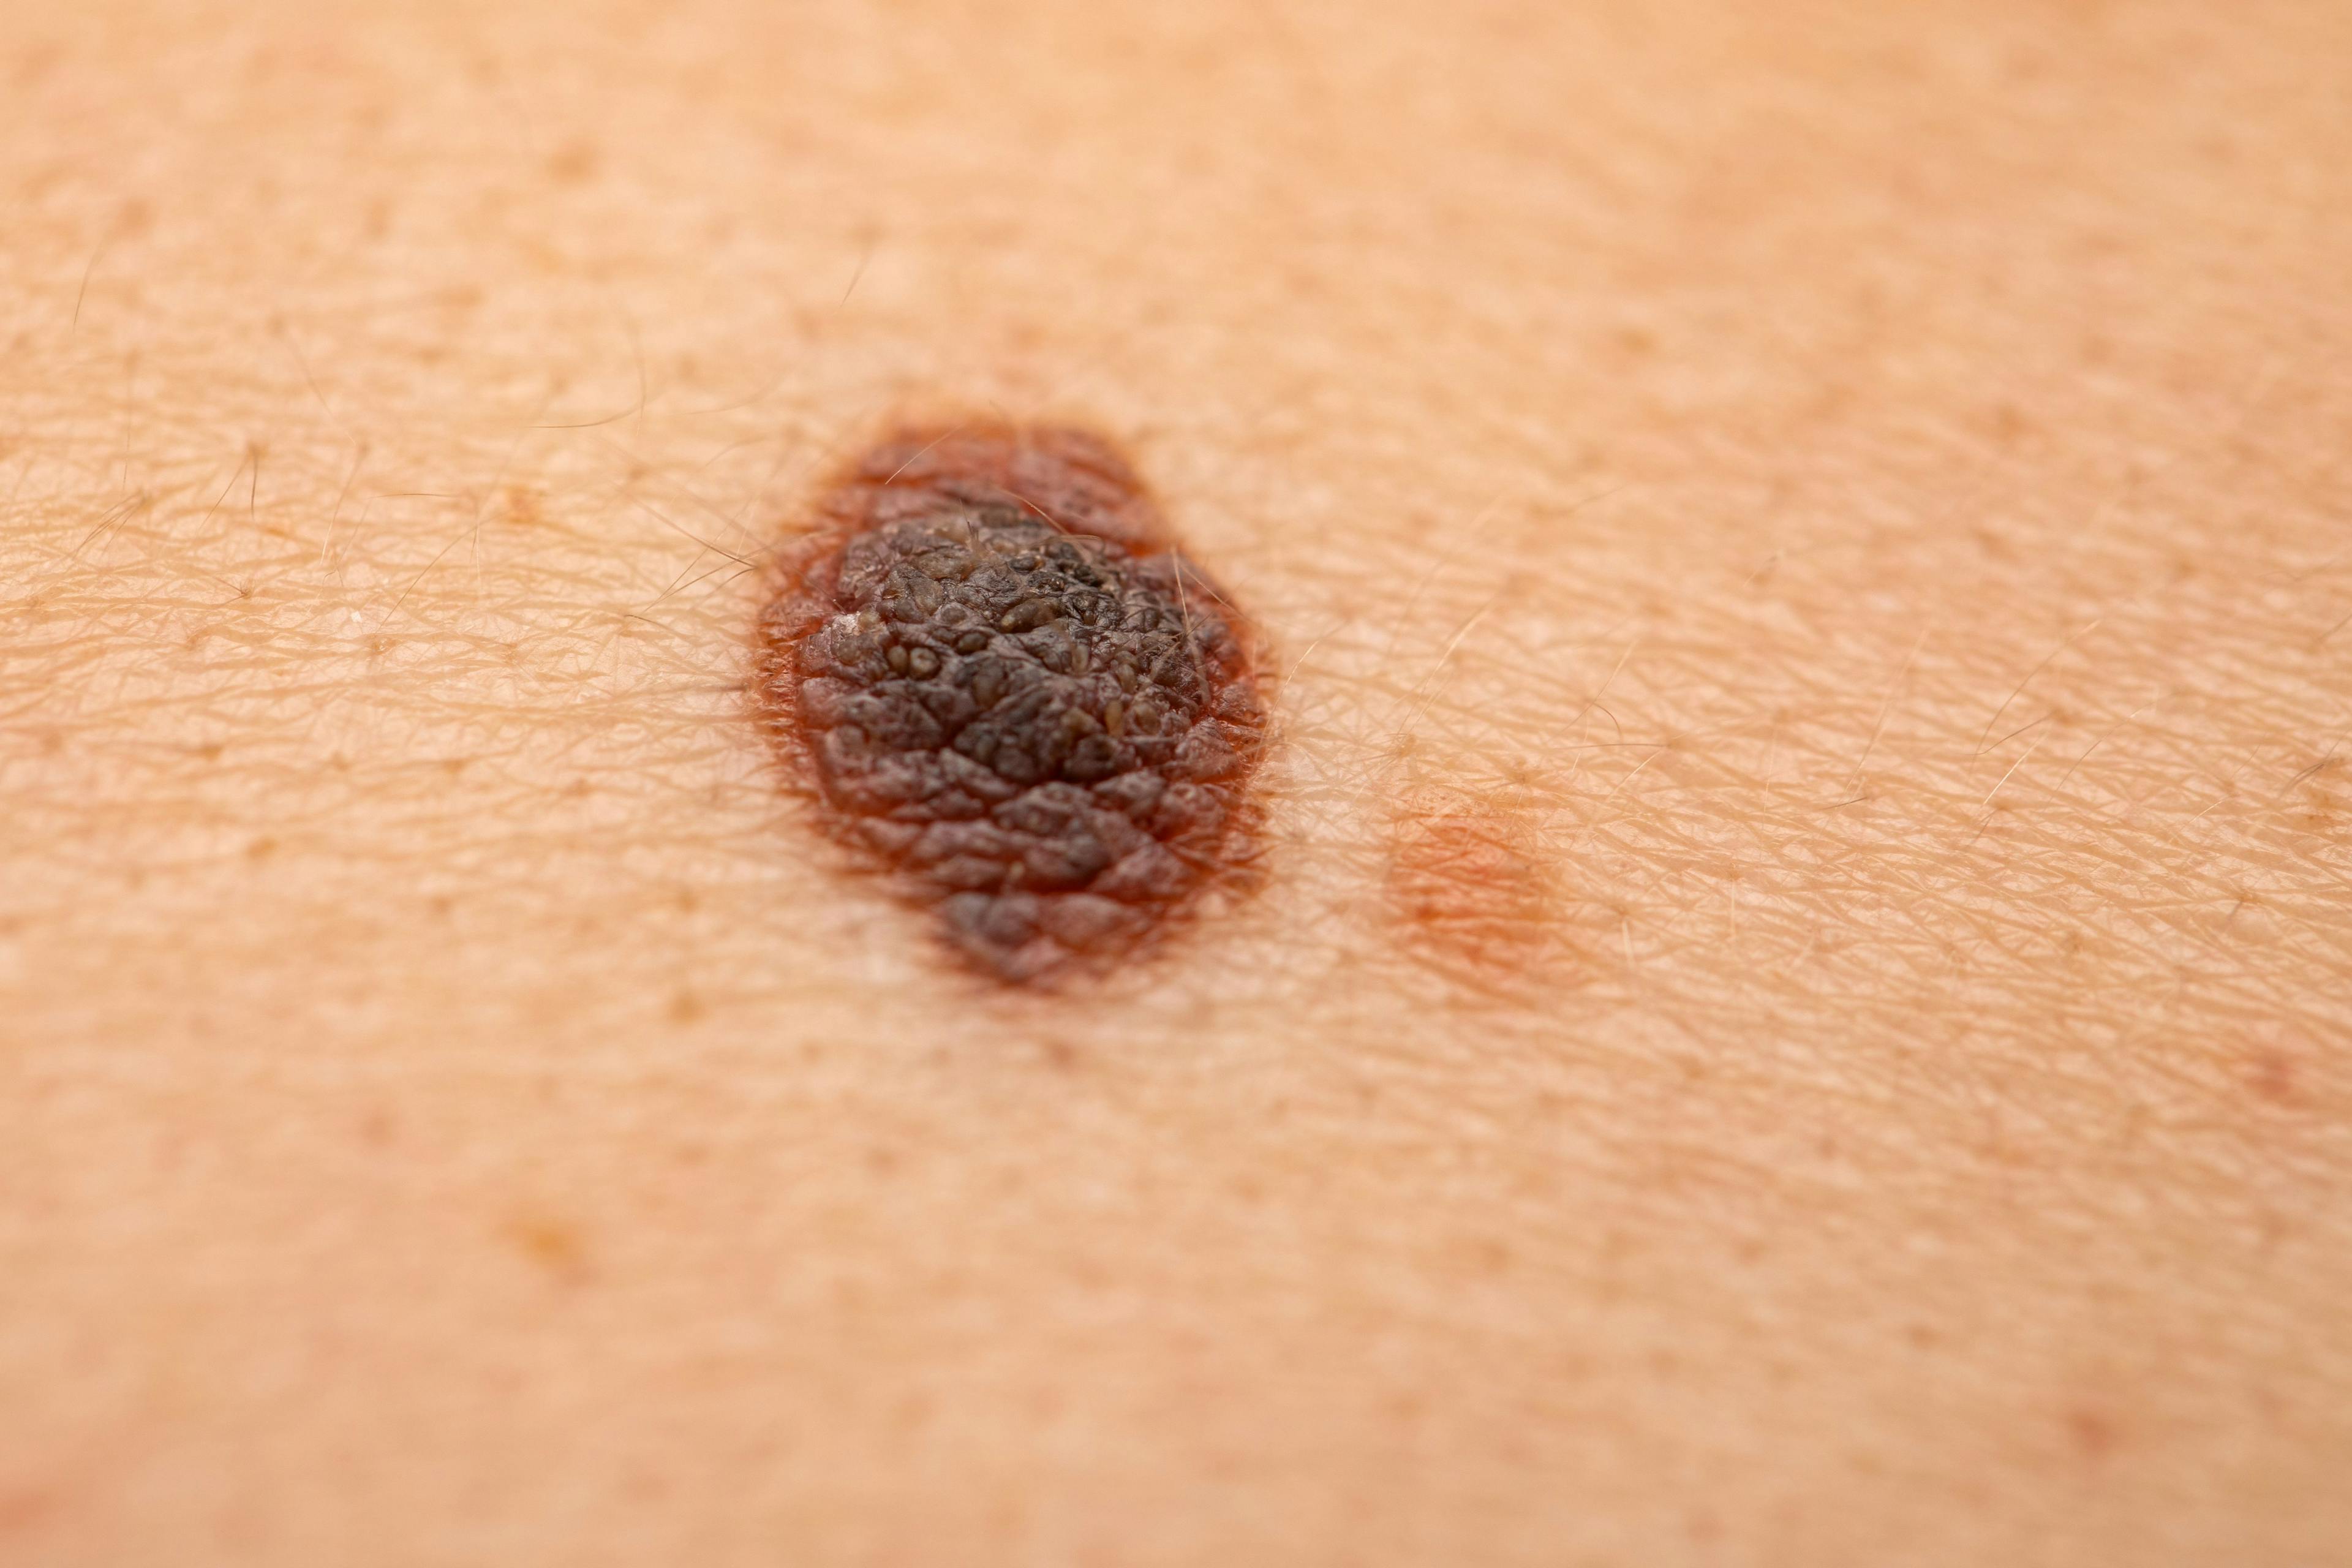 Close-up view of melanoma on the skin